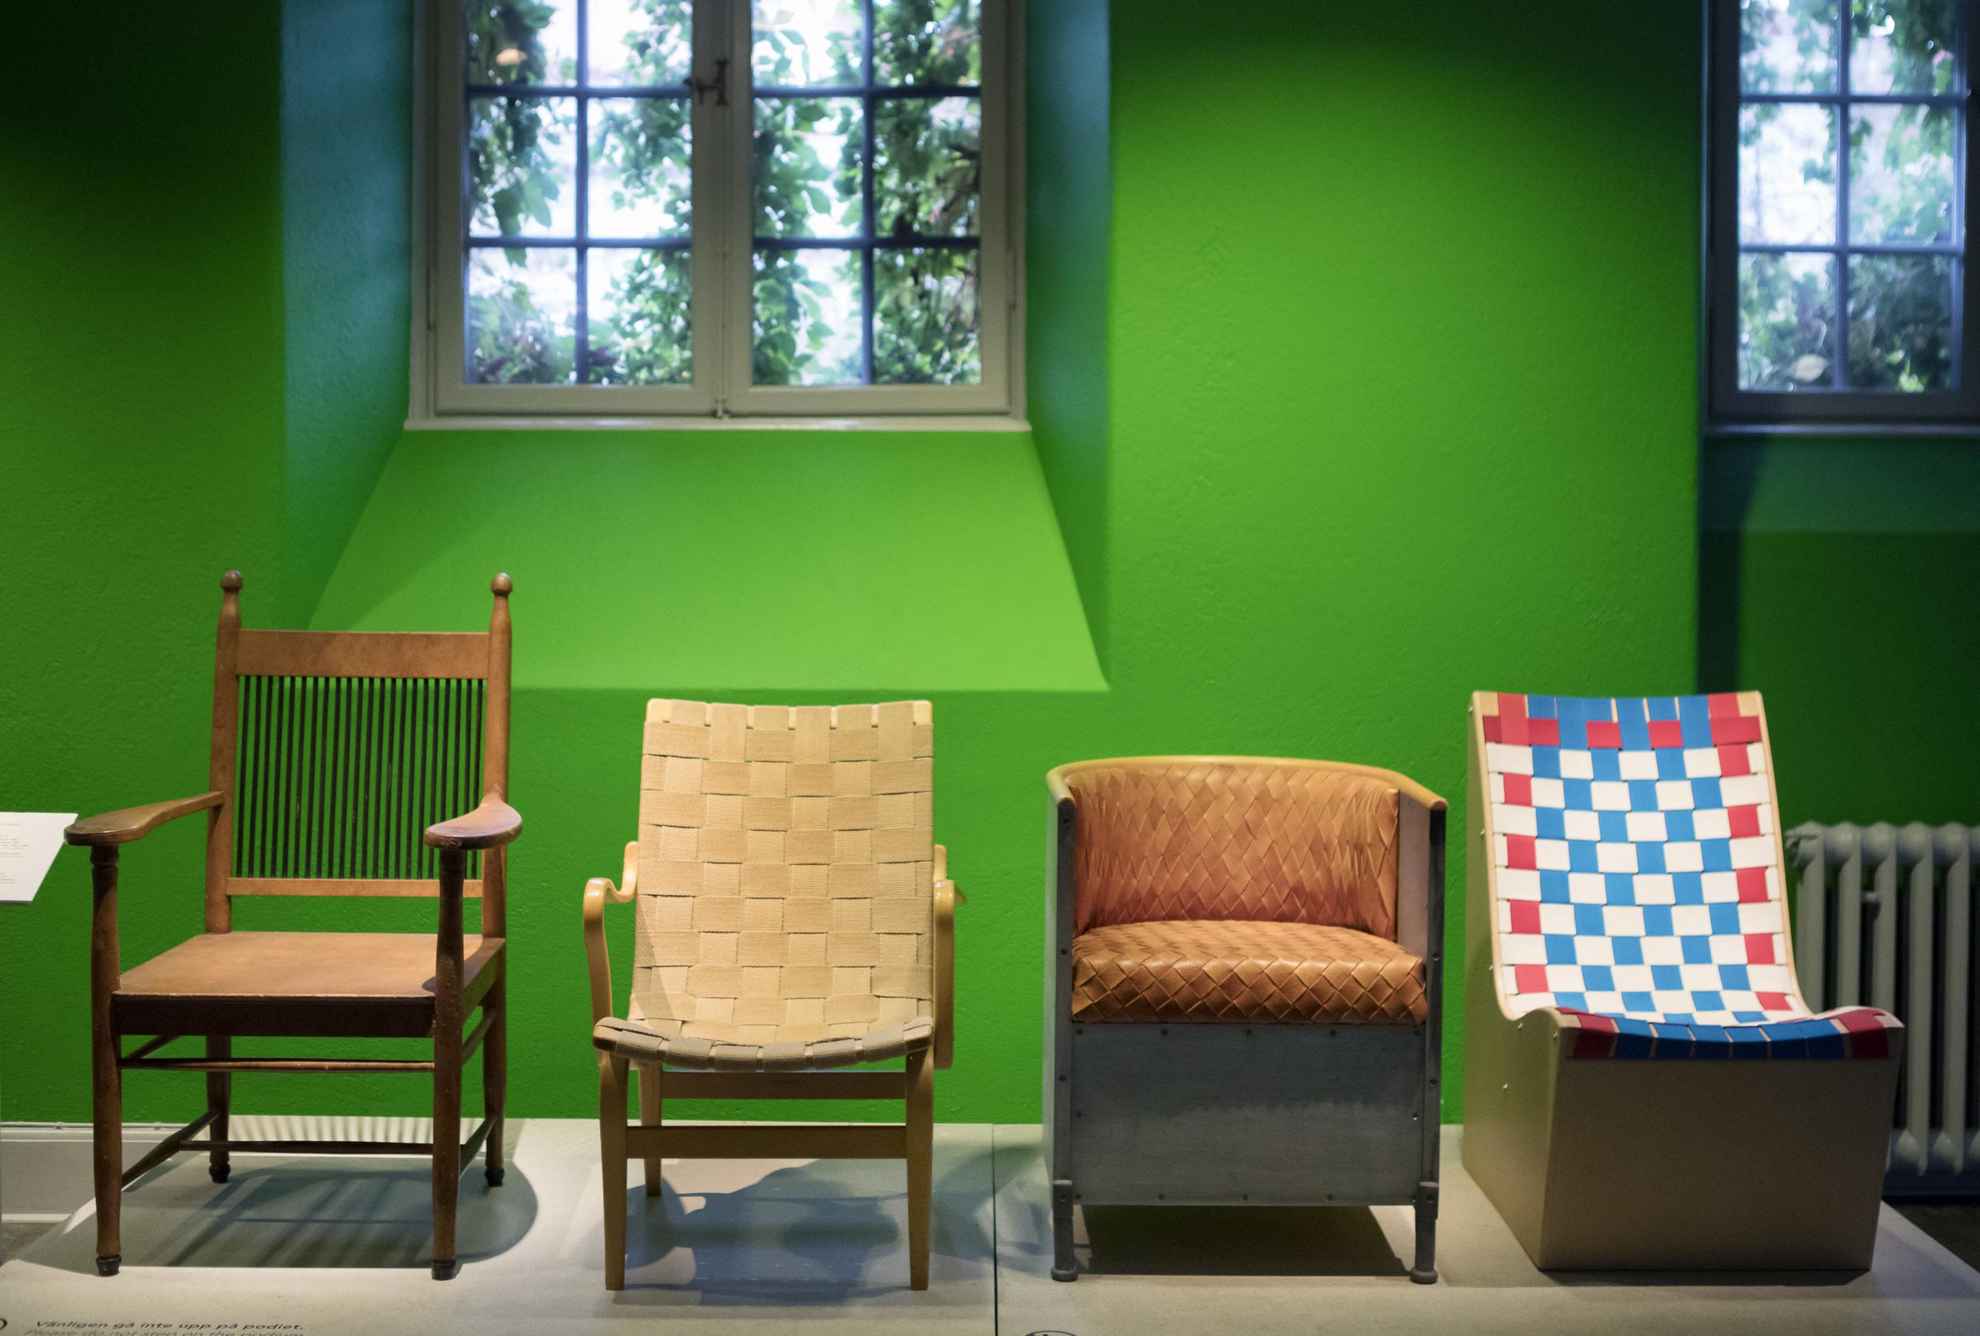 A exhibition showing four different chairs on a museum.